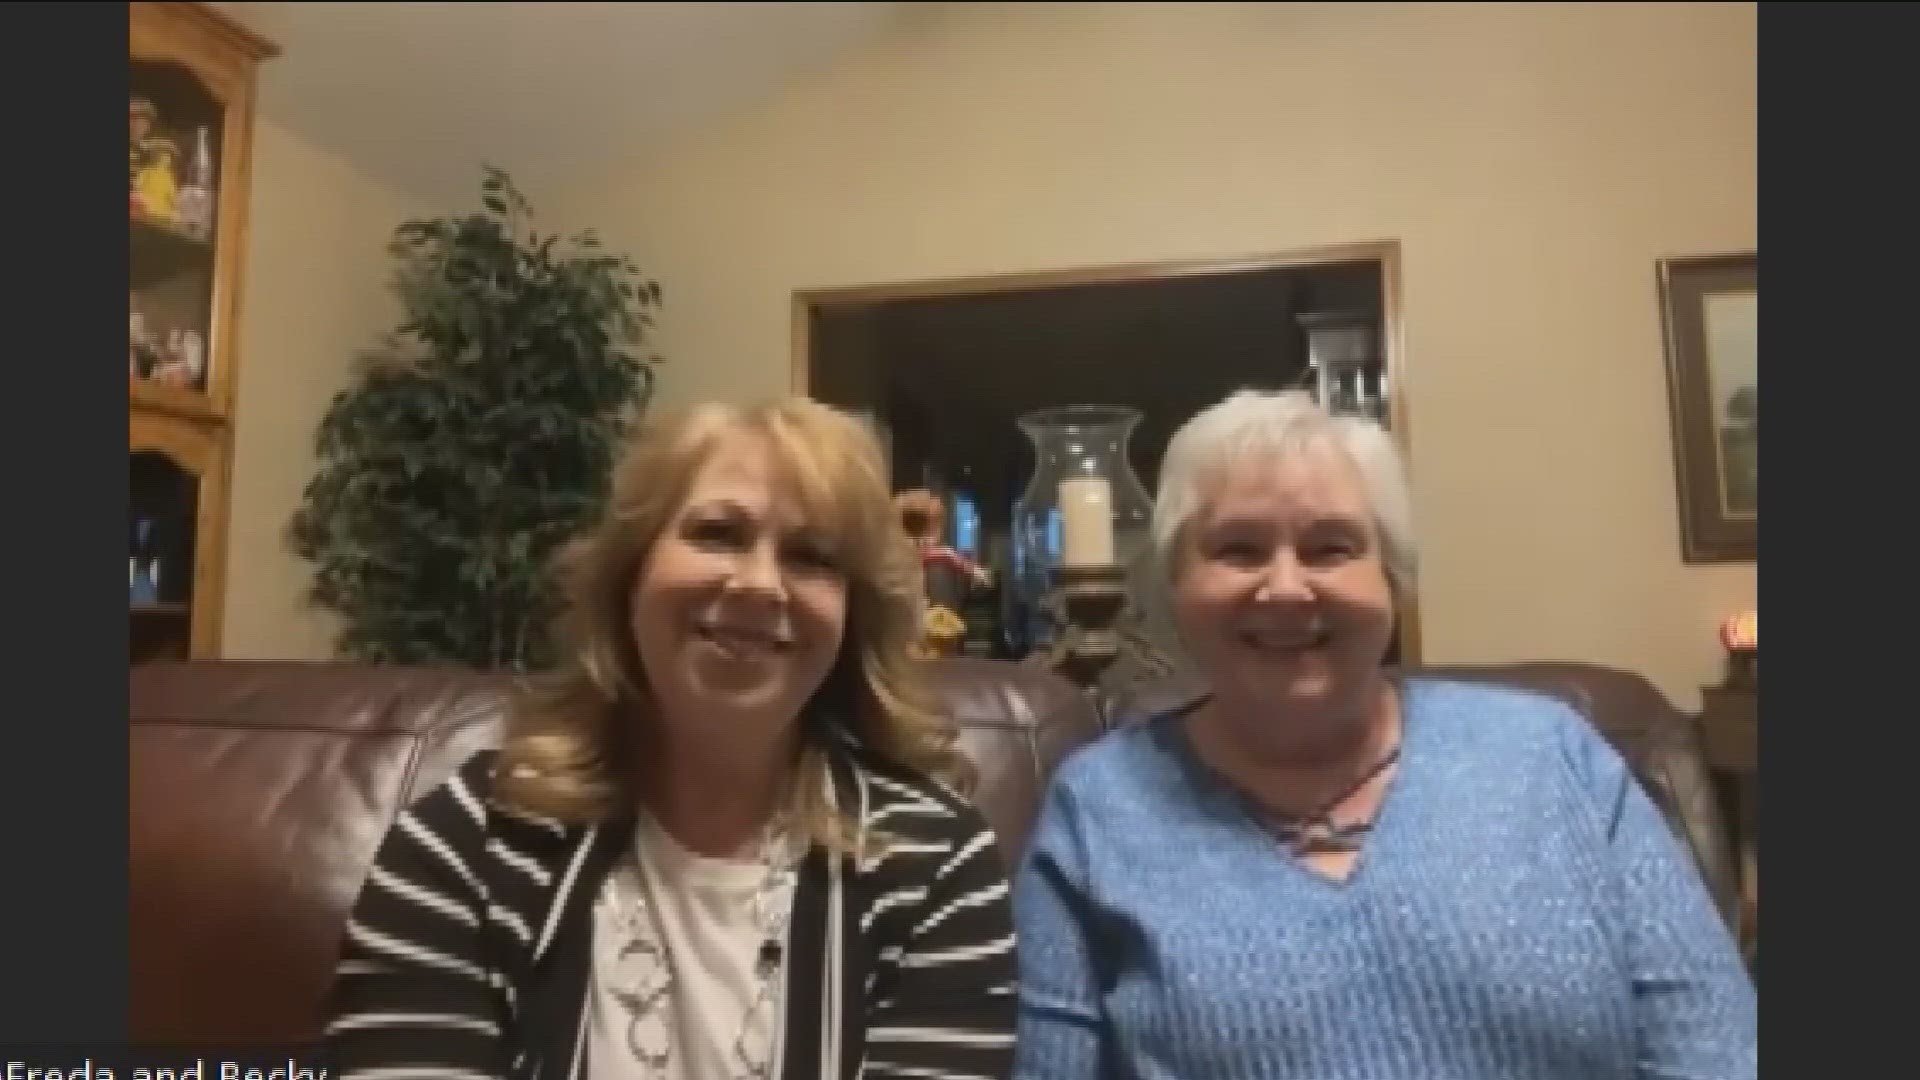 A mother and daughter in Le Flore County learned of their breast cancer diagnosis within months of each other.